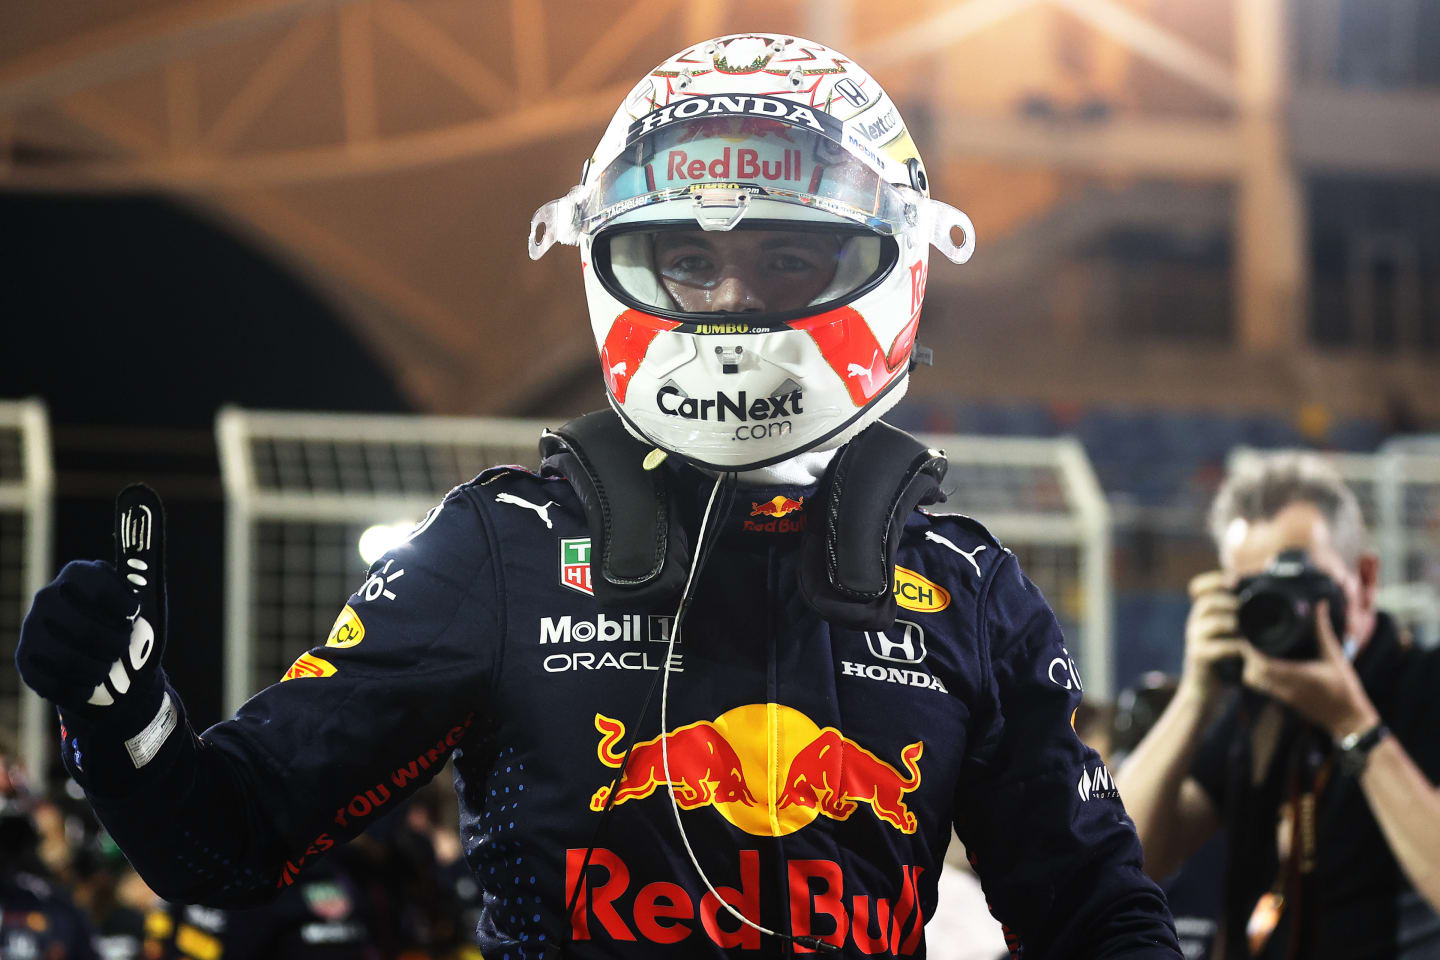 BAHRAIN, BAHRAIN - MARCH 27: Pole position qualifier Max Verstappen of Netherlands and Red Bull Racing celebrates in parc ferme during qualifying ahead of the F1 Grand Prix of Bahrain at Bahrain International Circuit on March 27, 2021 in Bahrain, Bahrain. (Photo by Lars Baron/Getty Images)